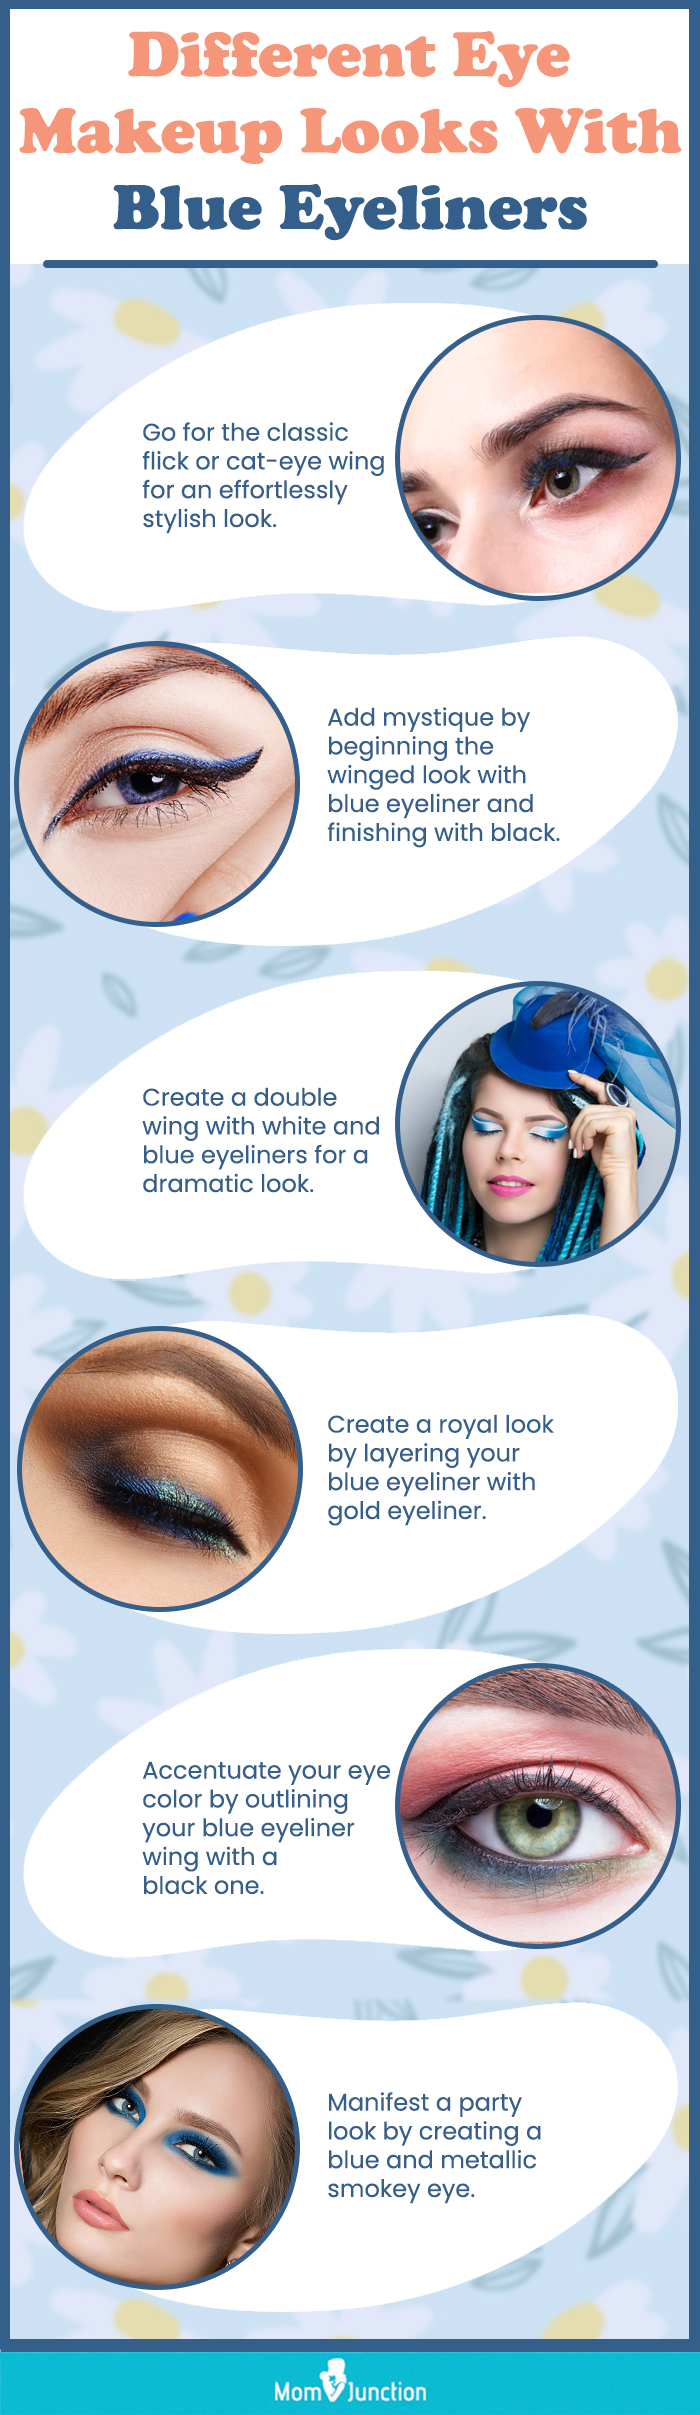 Different Eye Makeup Looks With Blue Eyeliners (infographic)